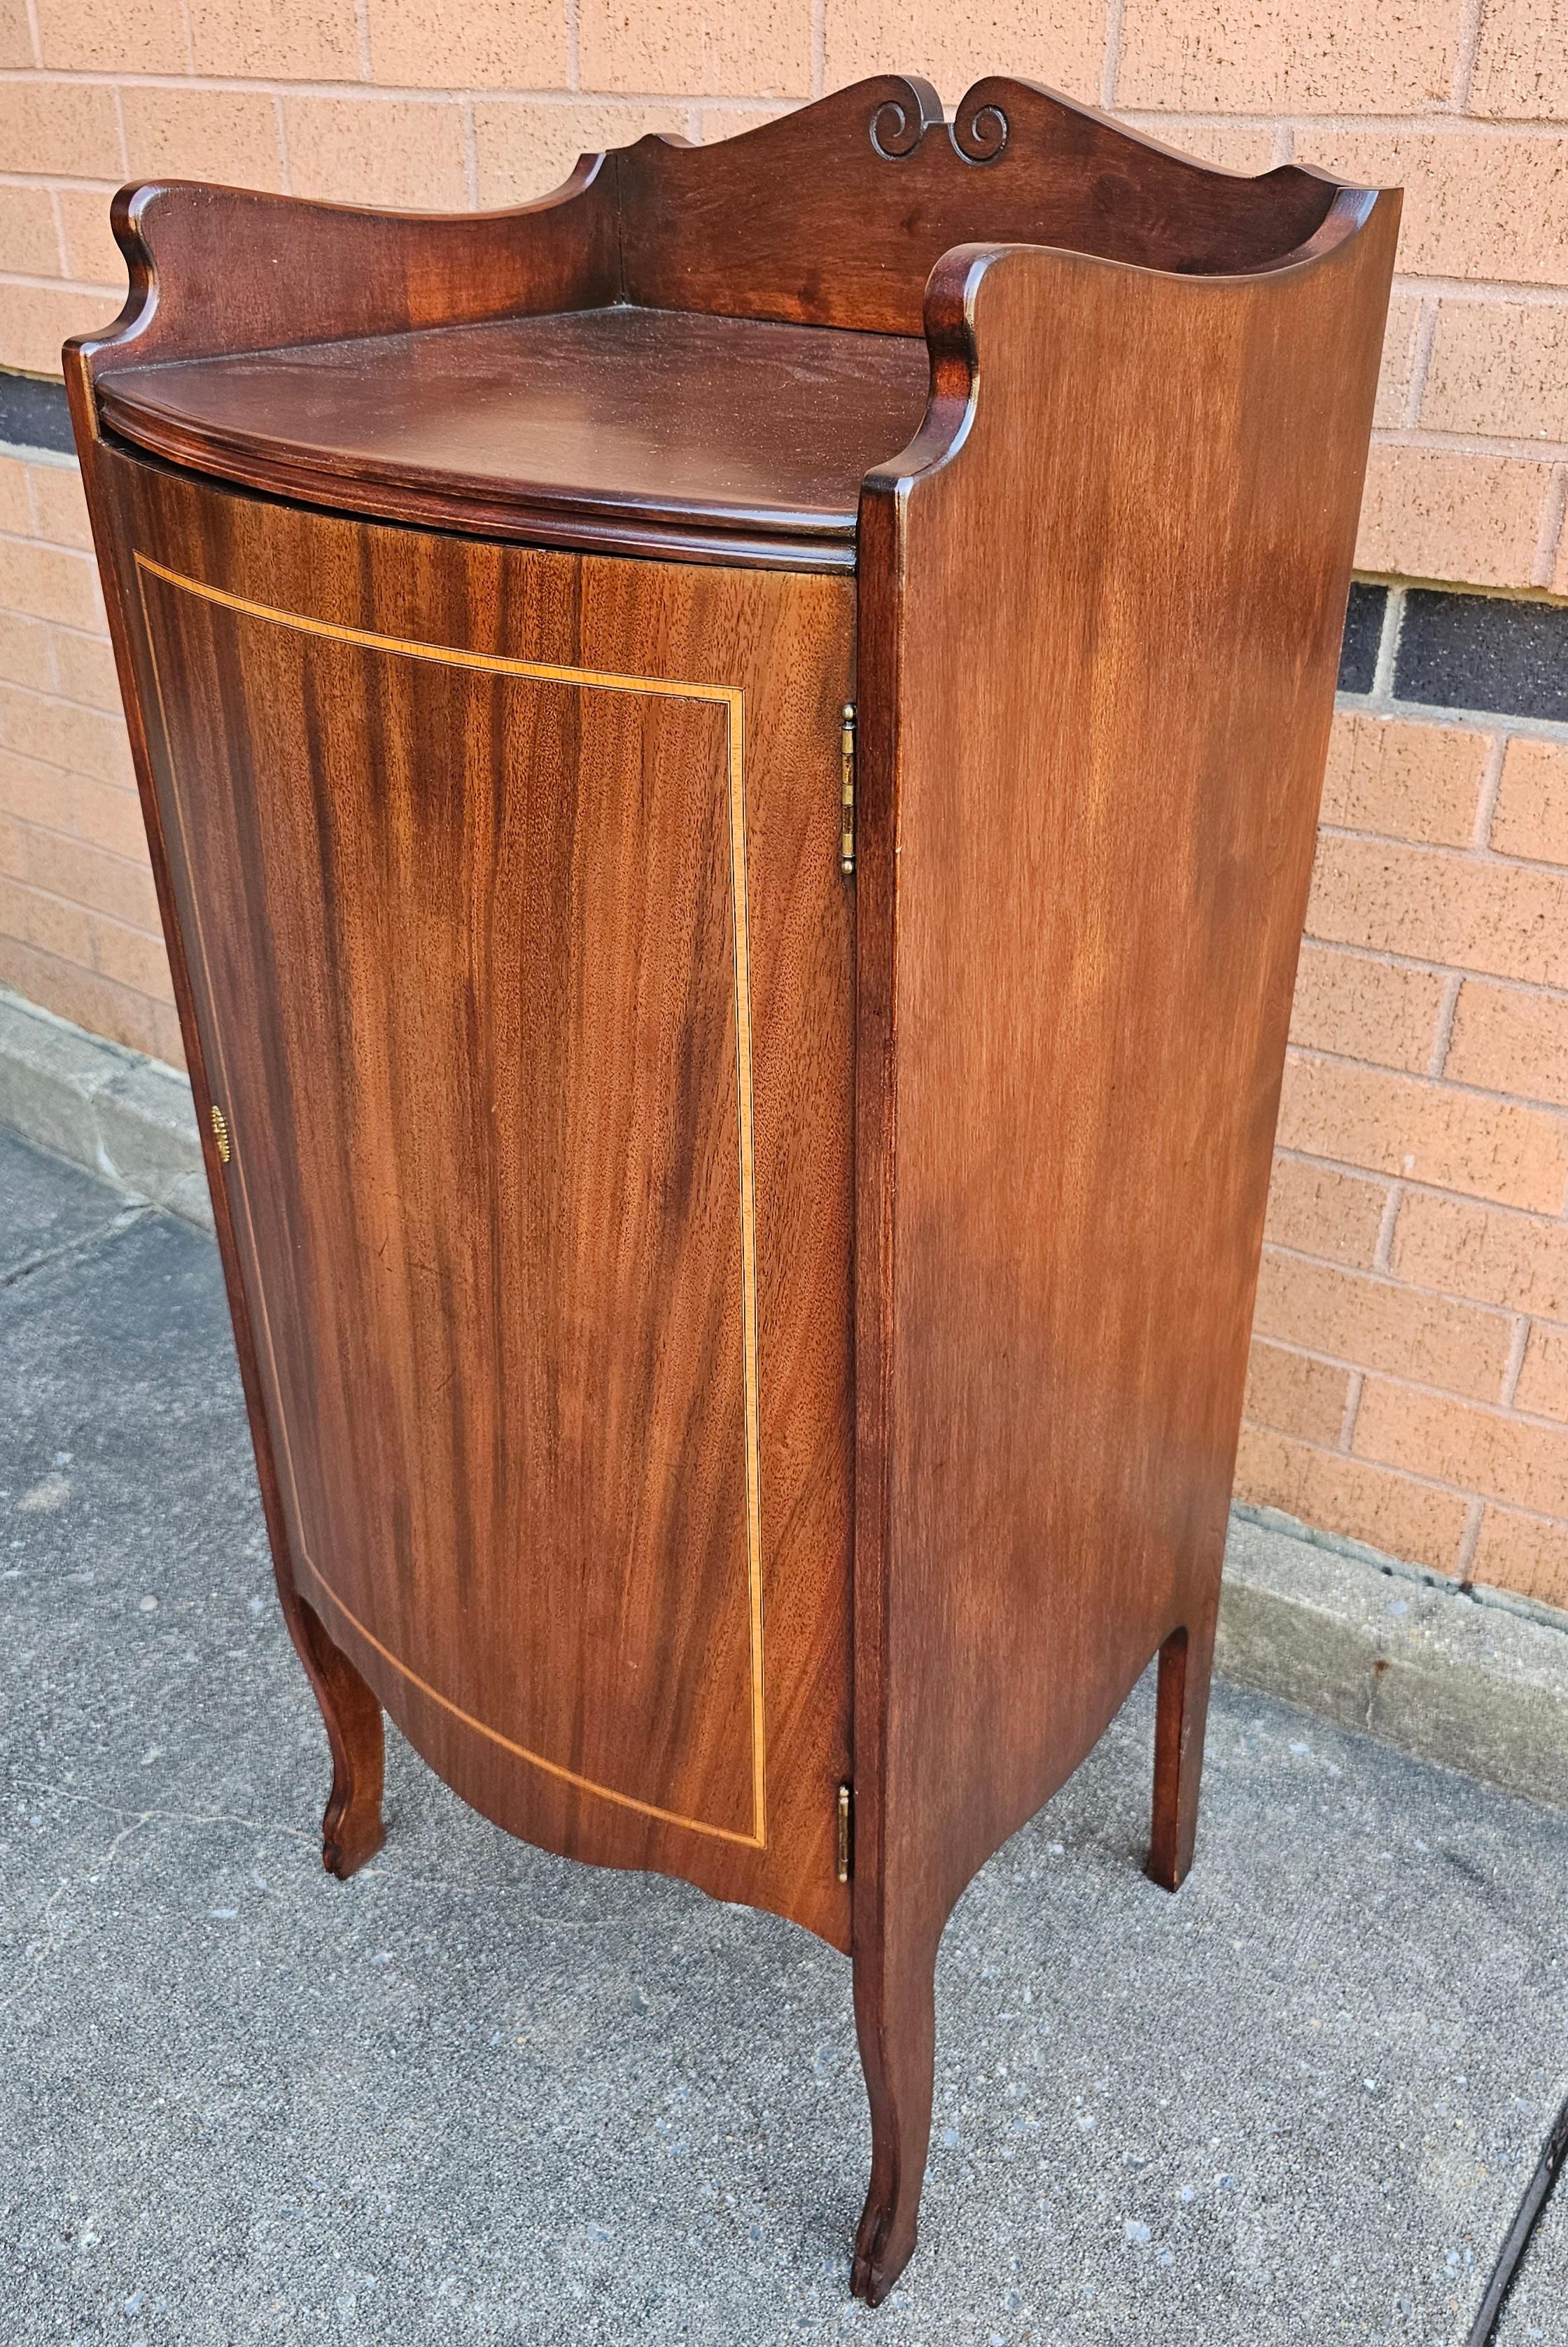 1930s Refinished Edwardian Mahogany and Satinwood Inlaid Sheet Music Cabinet For Sale 6